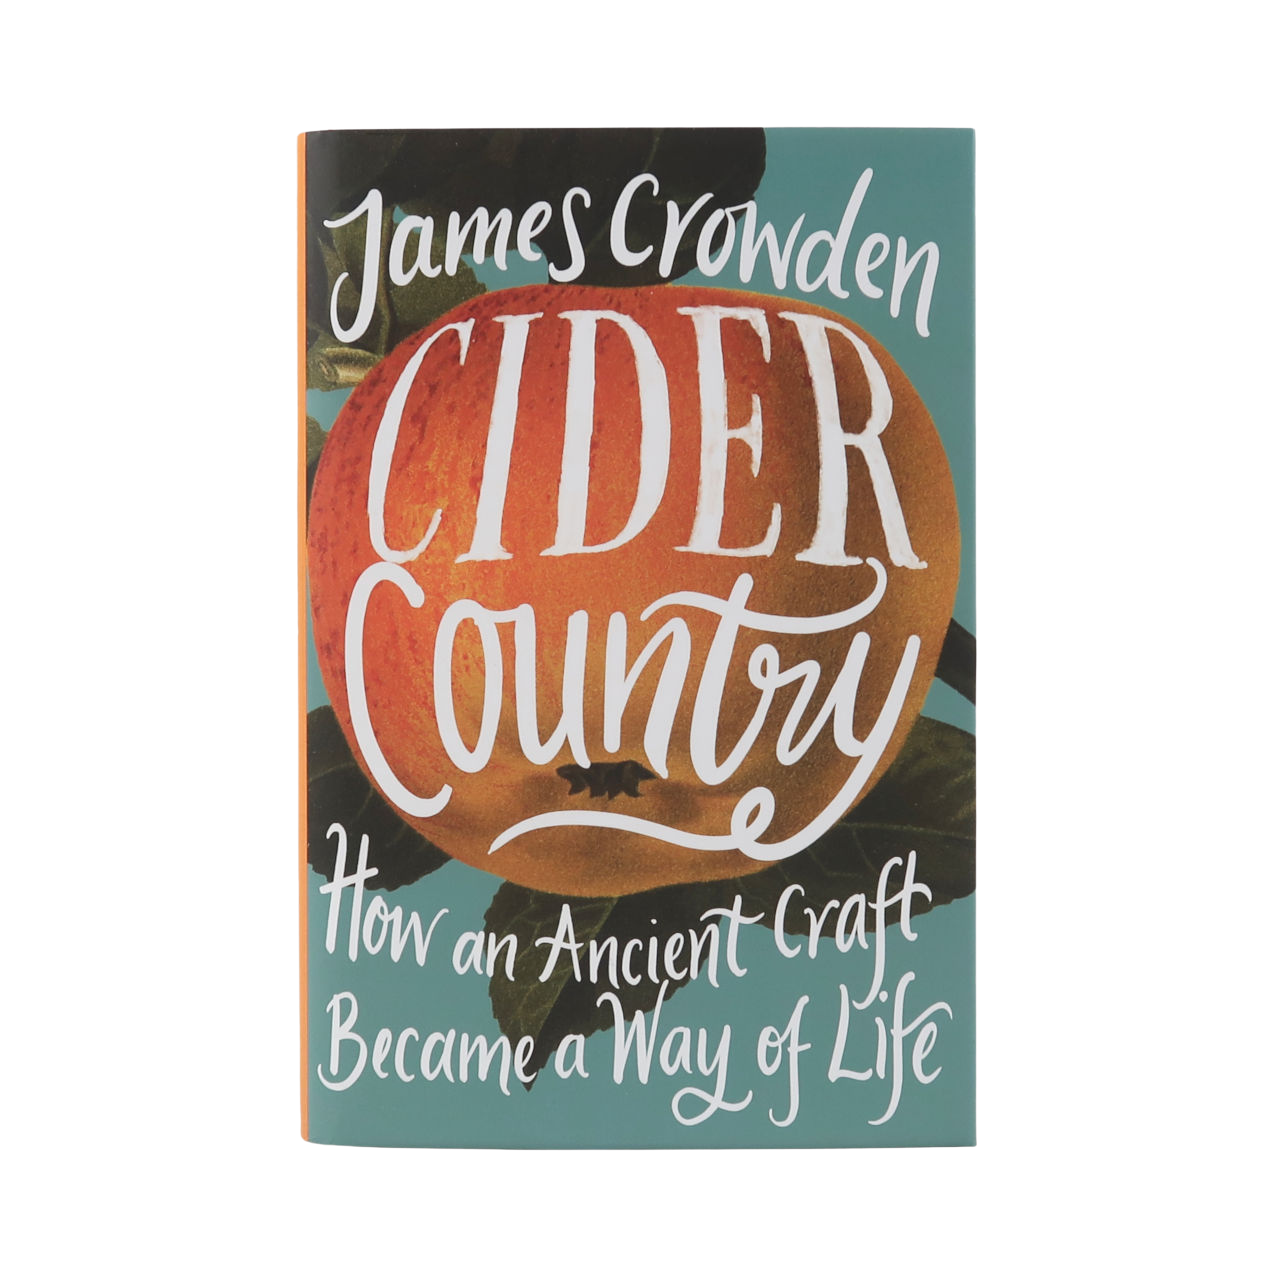 Collins Cider Country - James Crowden